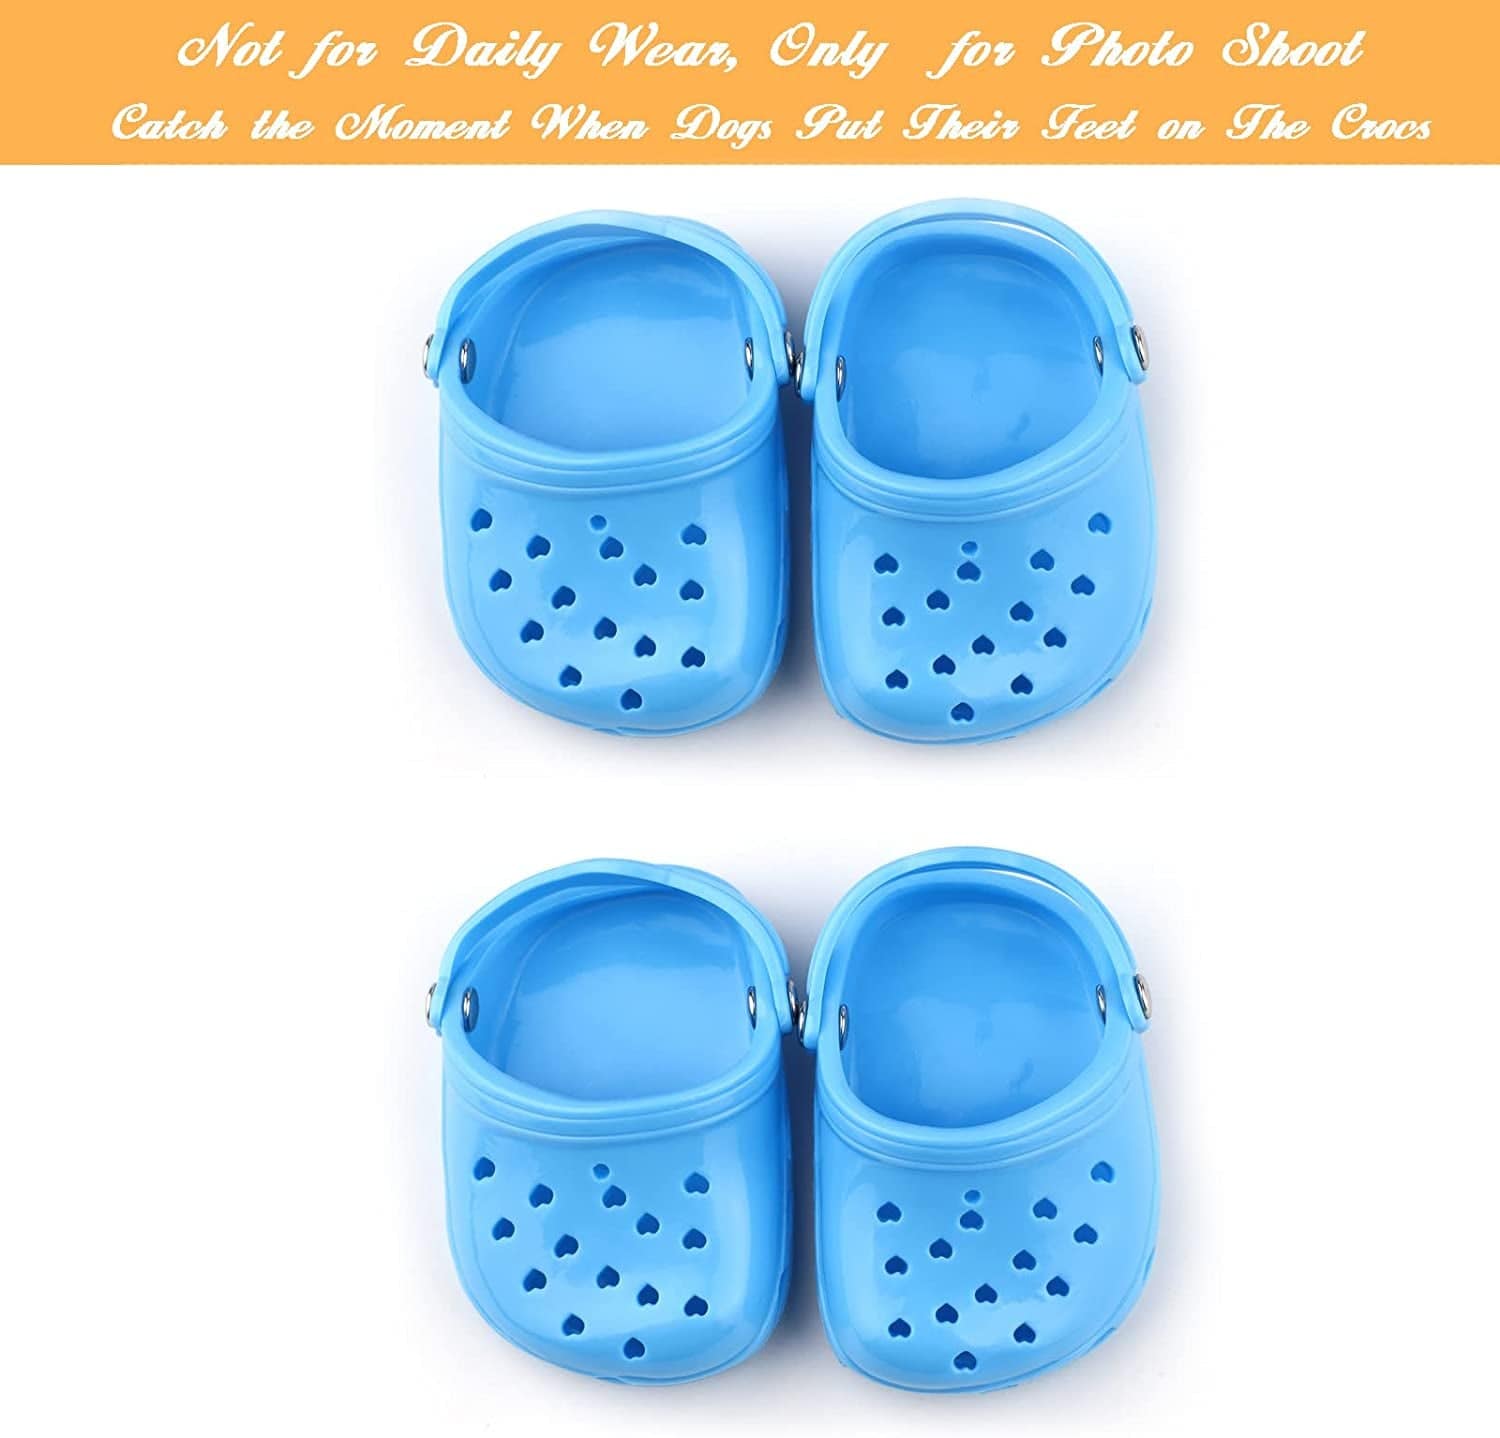 TIktoK Cat Crocs Candy Color Cat Sandals, Pet Decorative Crocs Only for  Cats and Tiny Dogs Photo Shoot. (cyan blue)